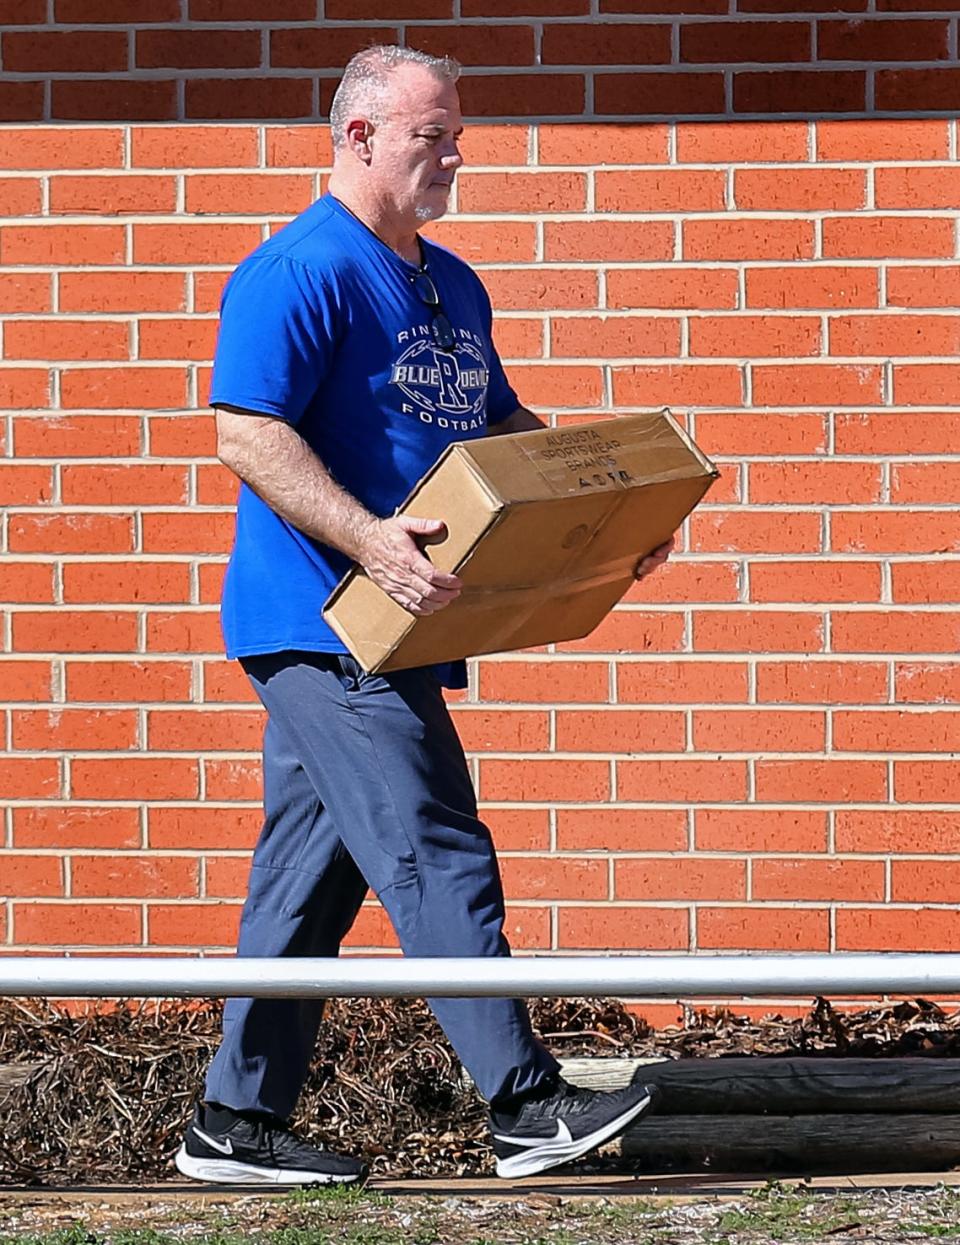 Philip Koons, the Ringling High School football coach and principal, walks out of the Ringling Public Schools superintendent's office on Feb. 22, 2023, when he was placed on leave amid allegations that he bullied players.